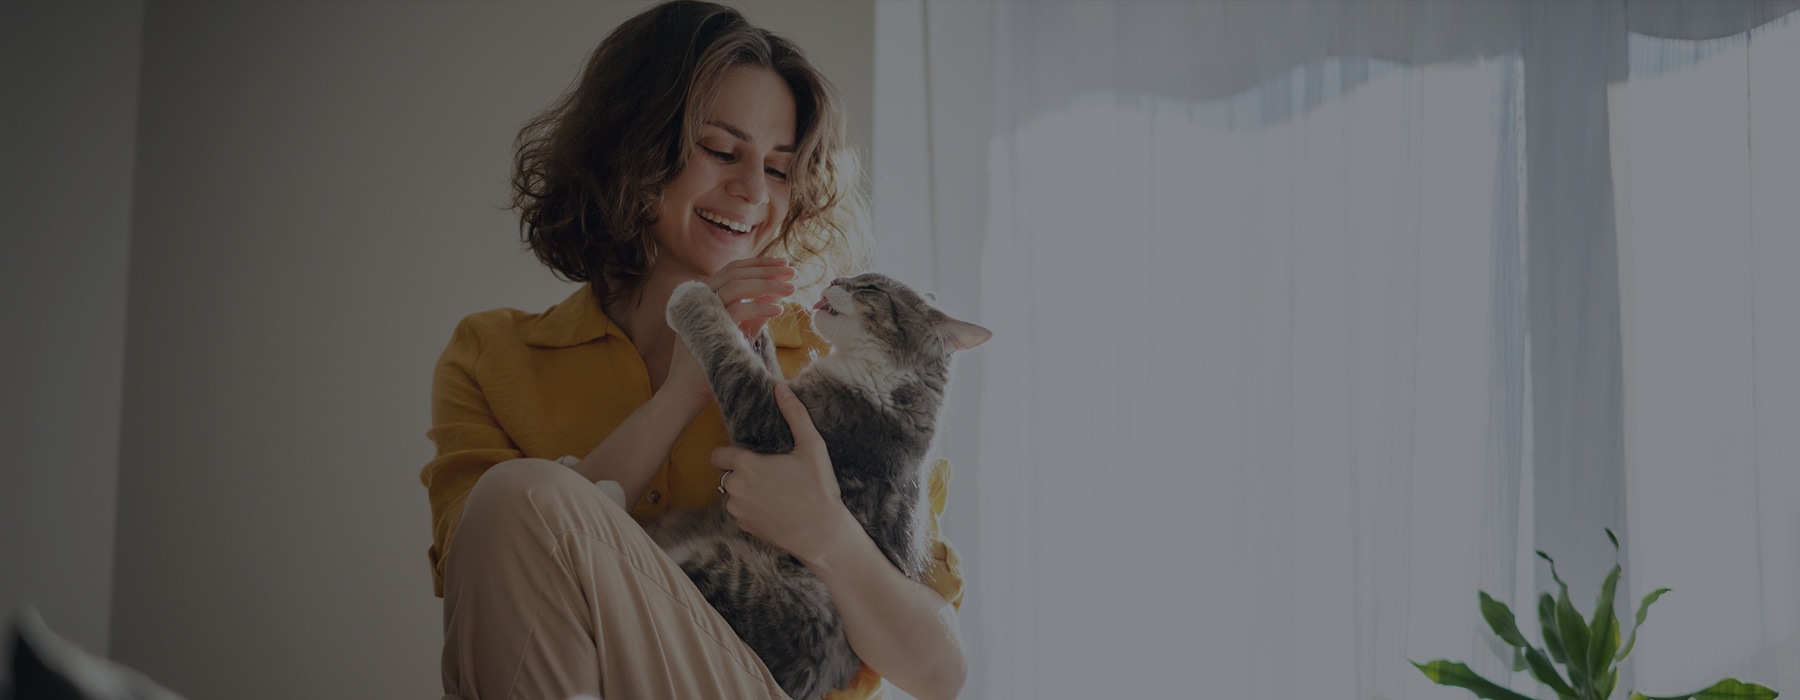 lifestyle image of a woman petting a cat